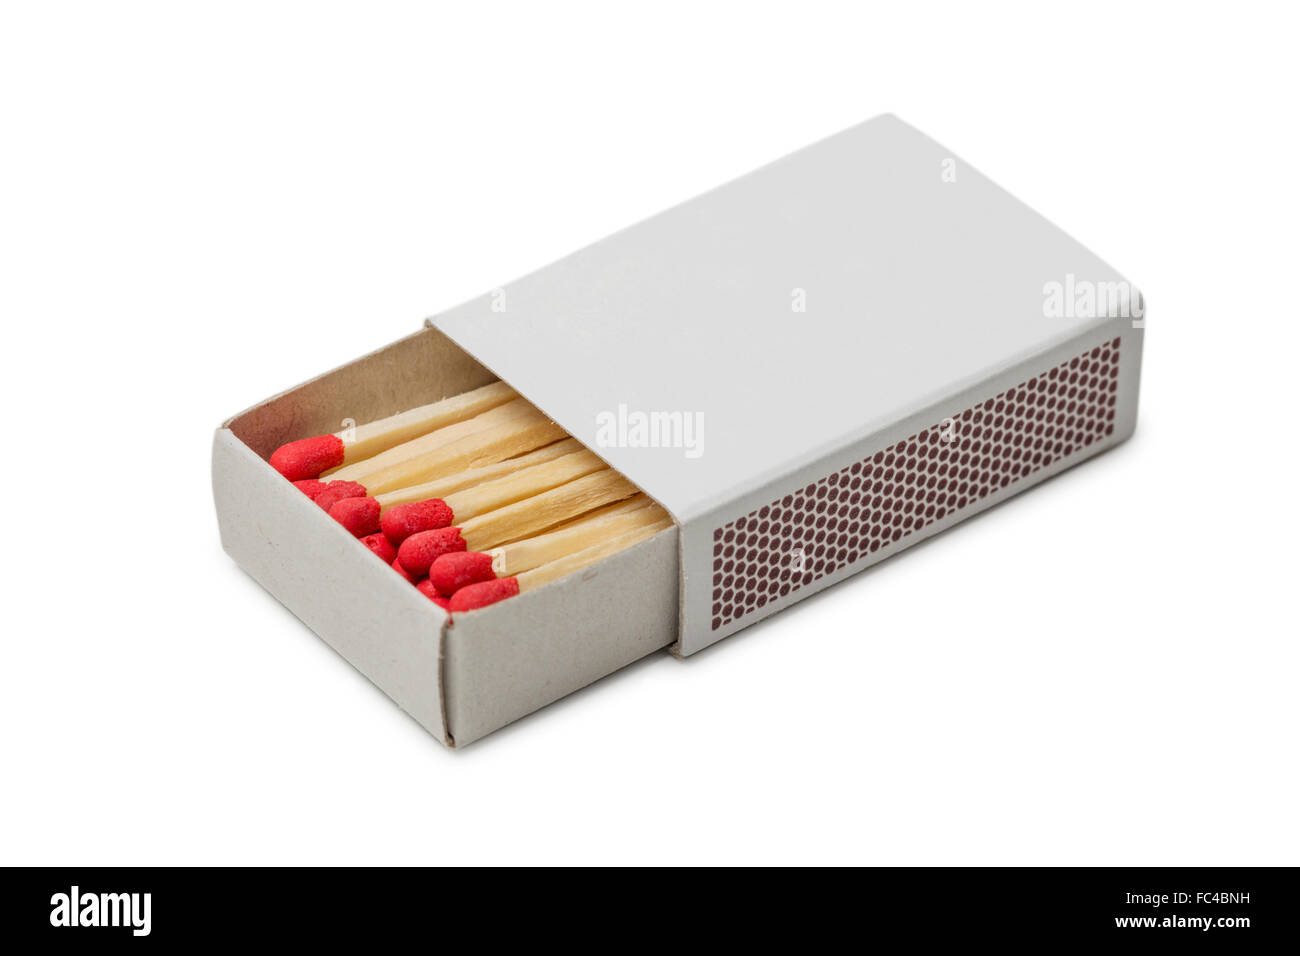 Matchbox with red matches isolated on white background Stock Photo